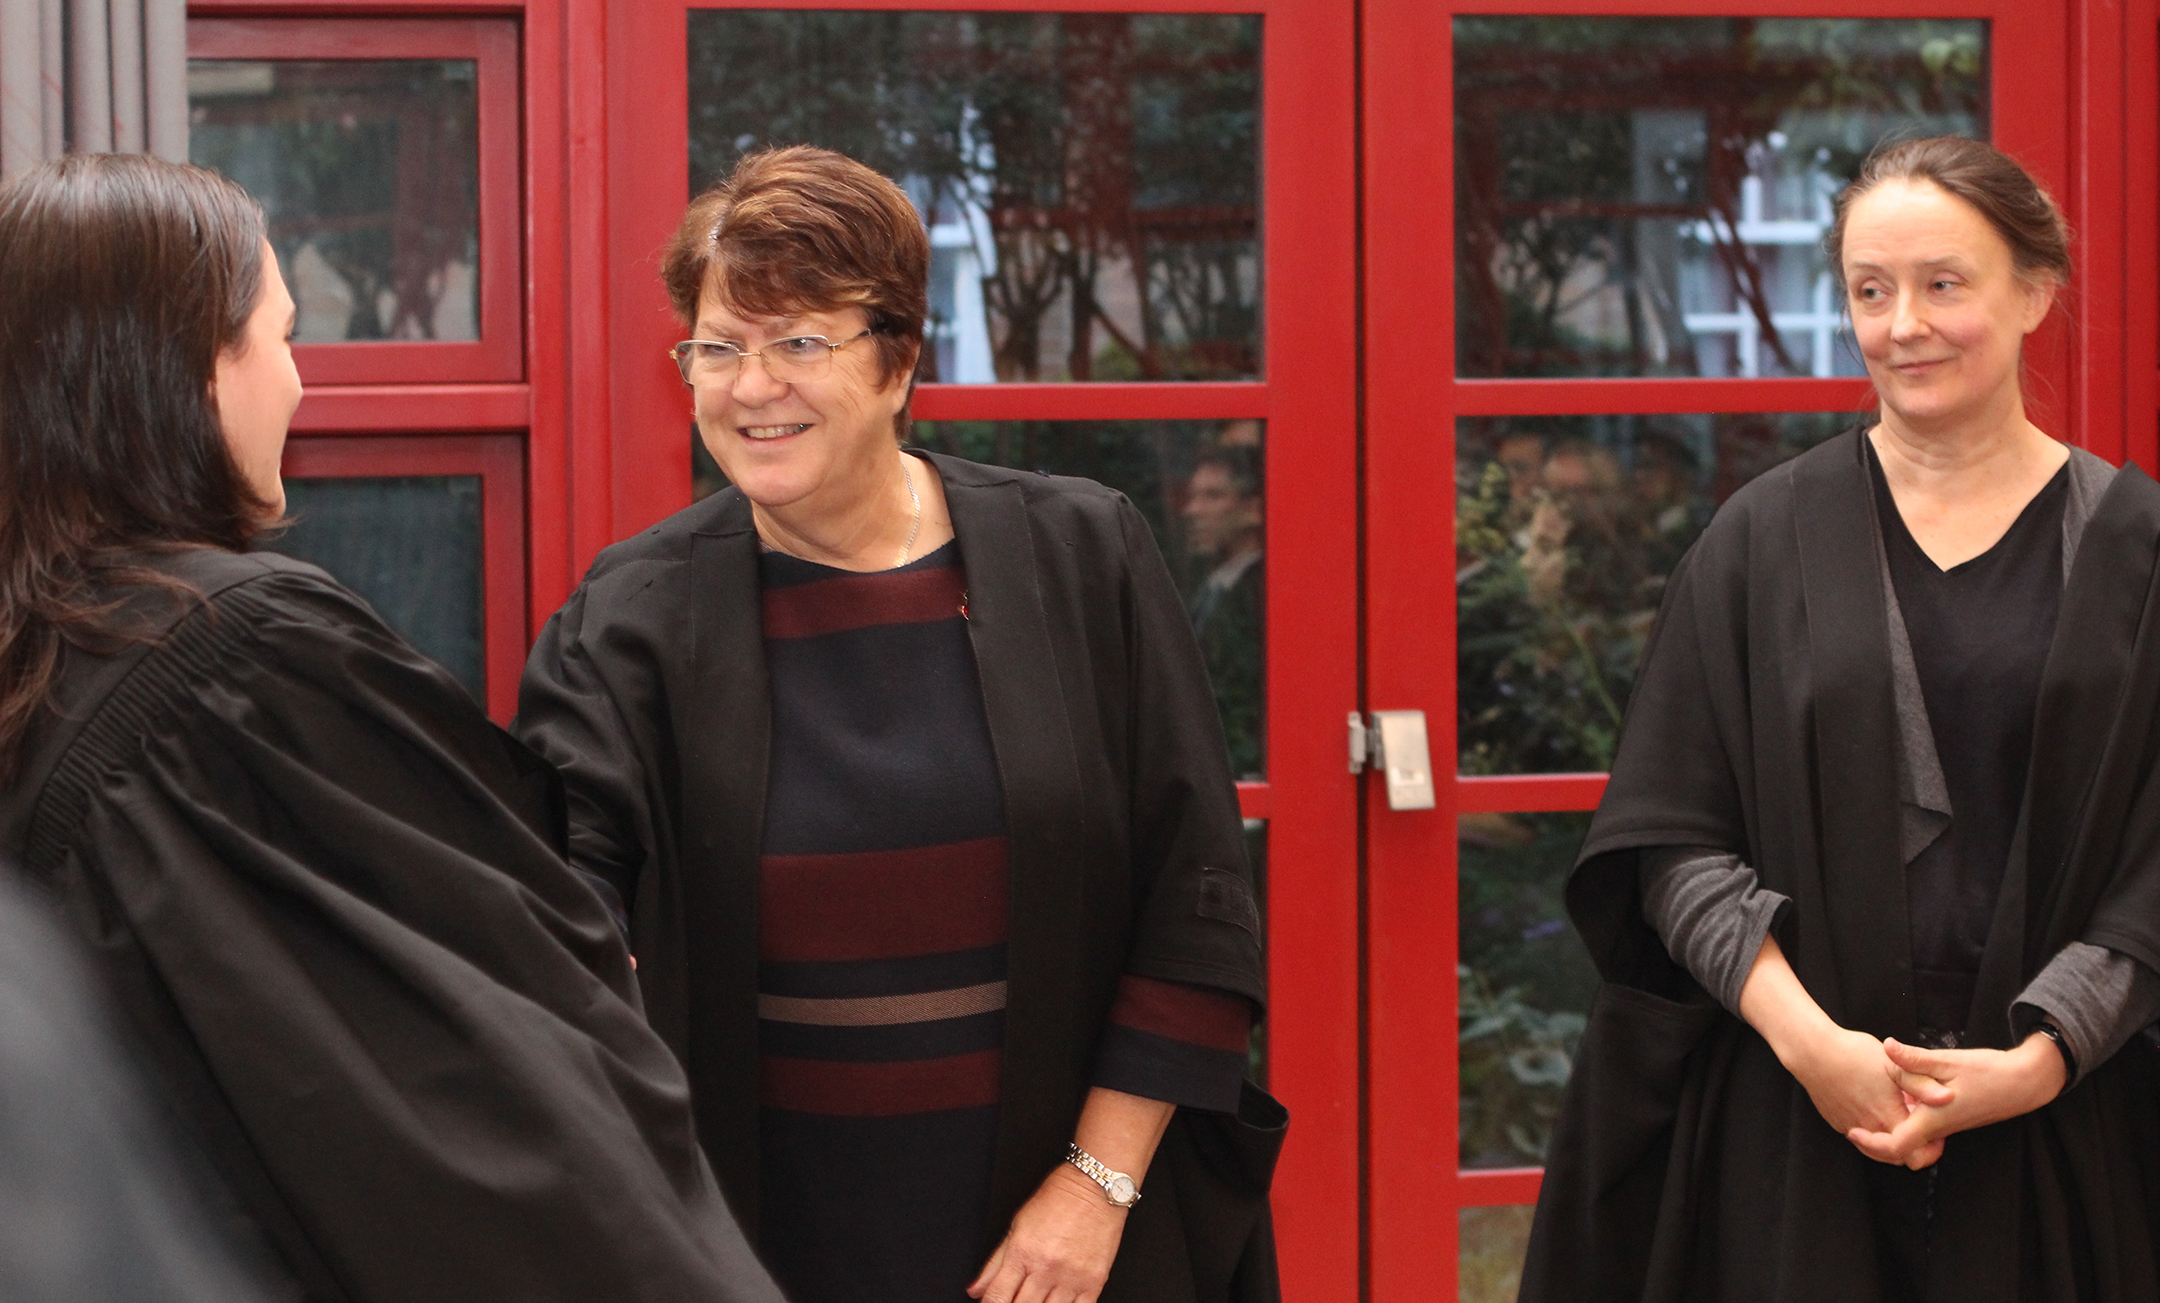 Professor Jane Clarke and Senior Tutor Dr Susan Larsen at a matriculation ceremony to welcome new students.